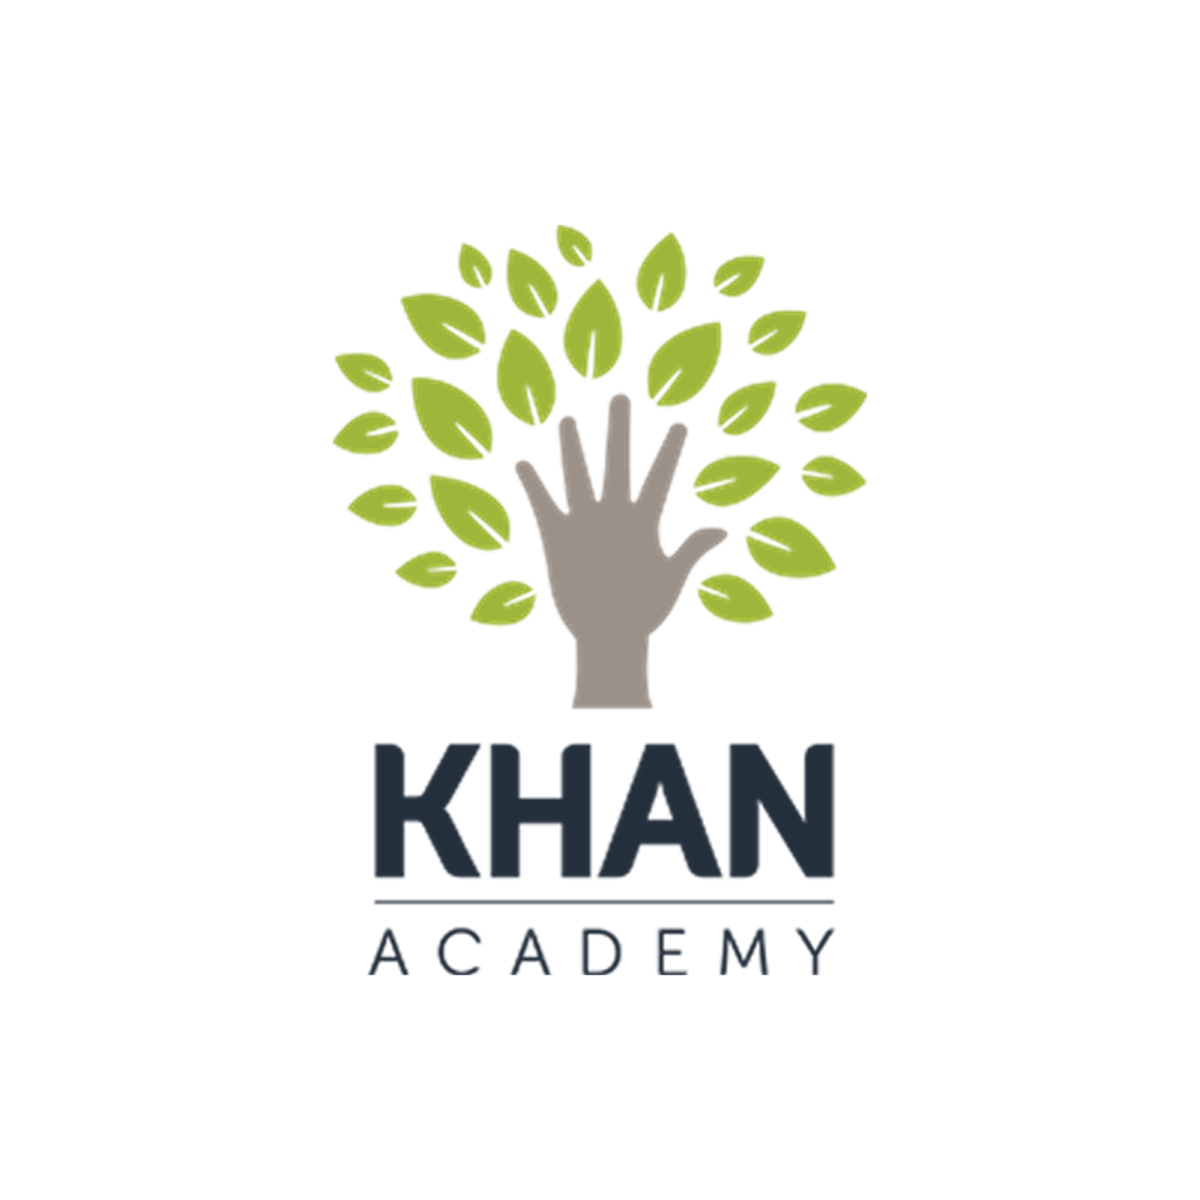 Khan Academy is the most-popular e-learning site. 